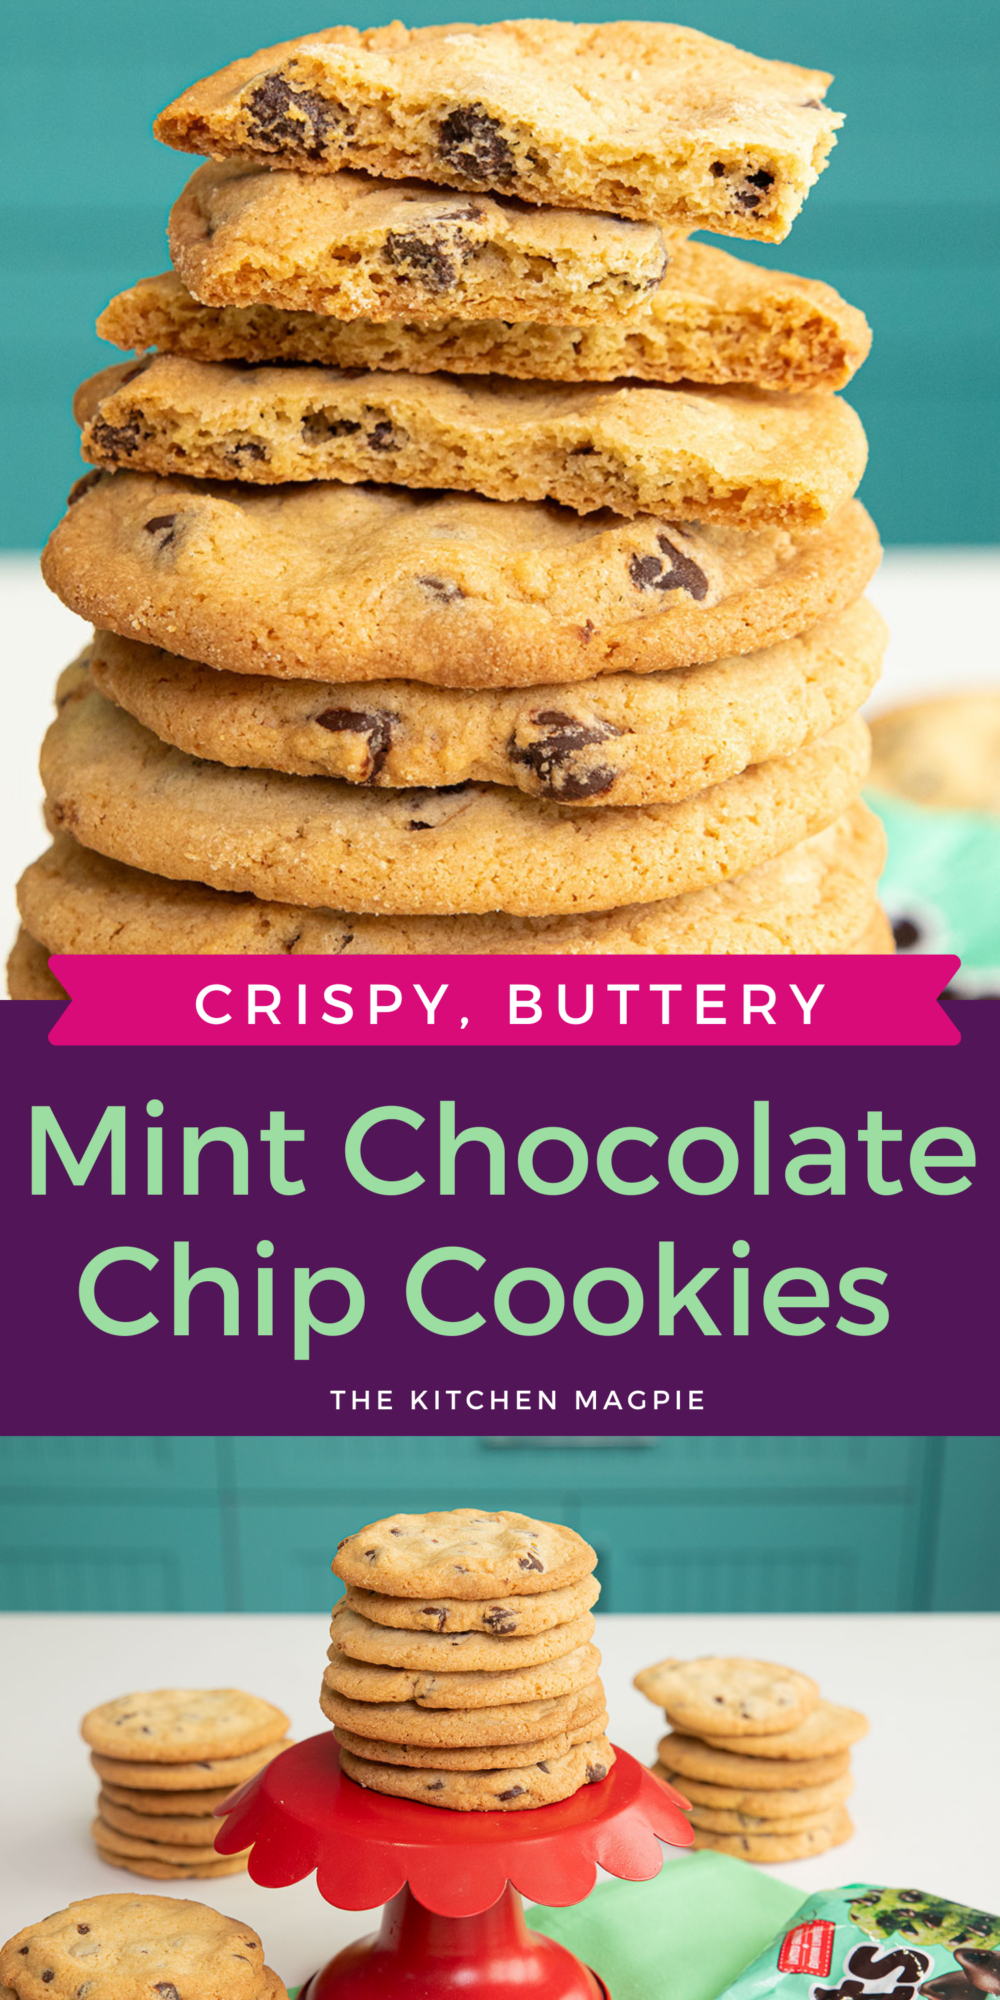 This crispy, buttery mint chocolate chip cookie recipe is the perfect cookie for those of you who love everything mint!